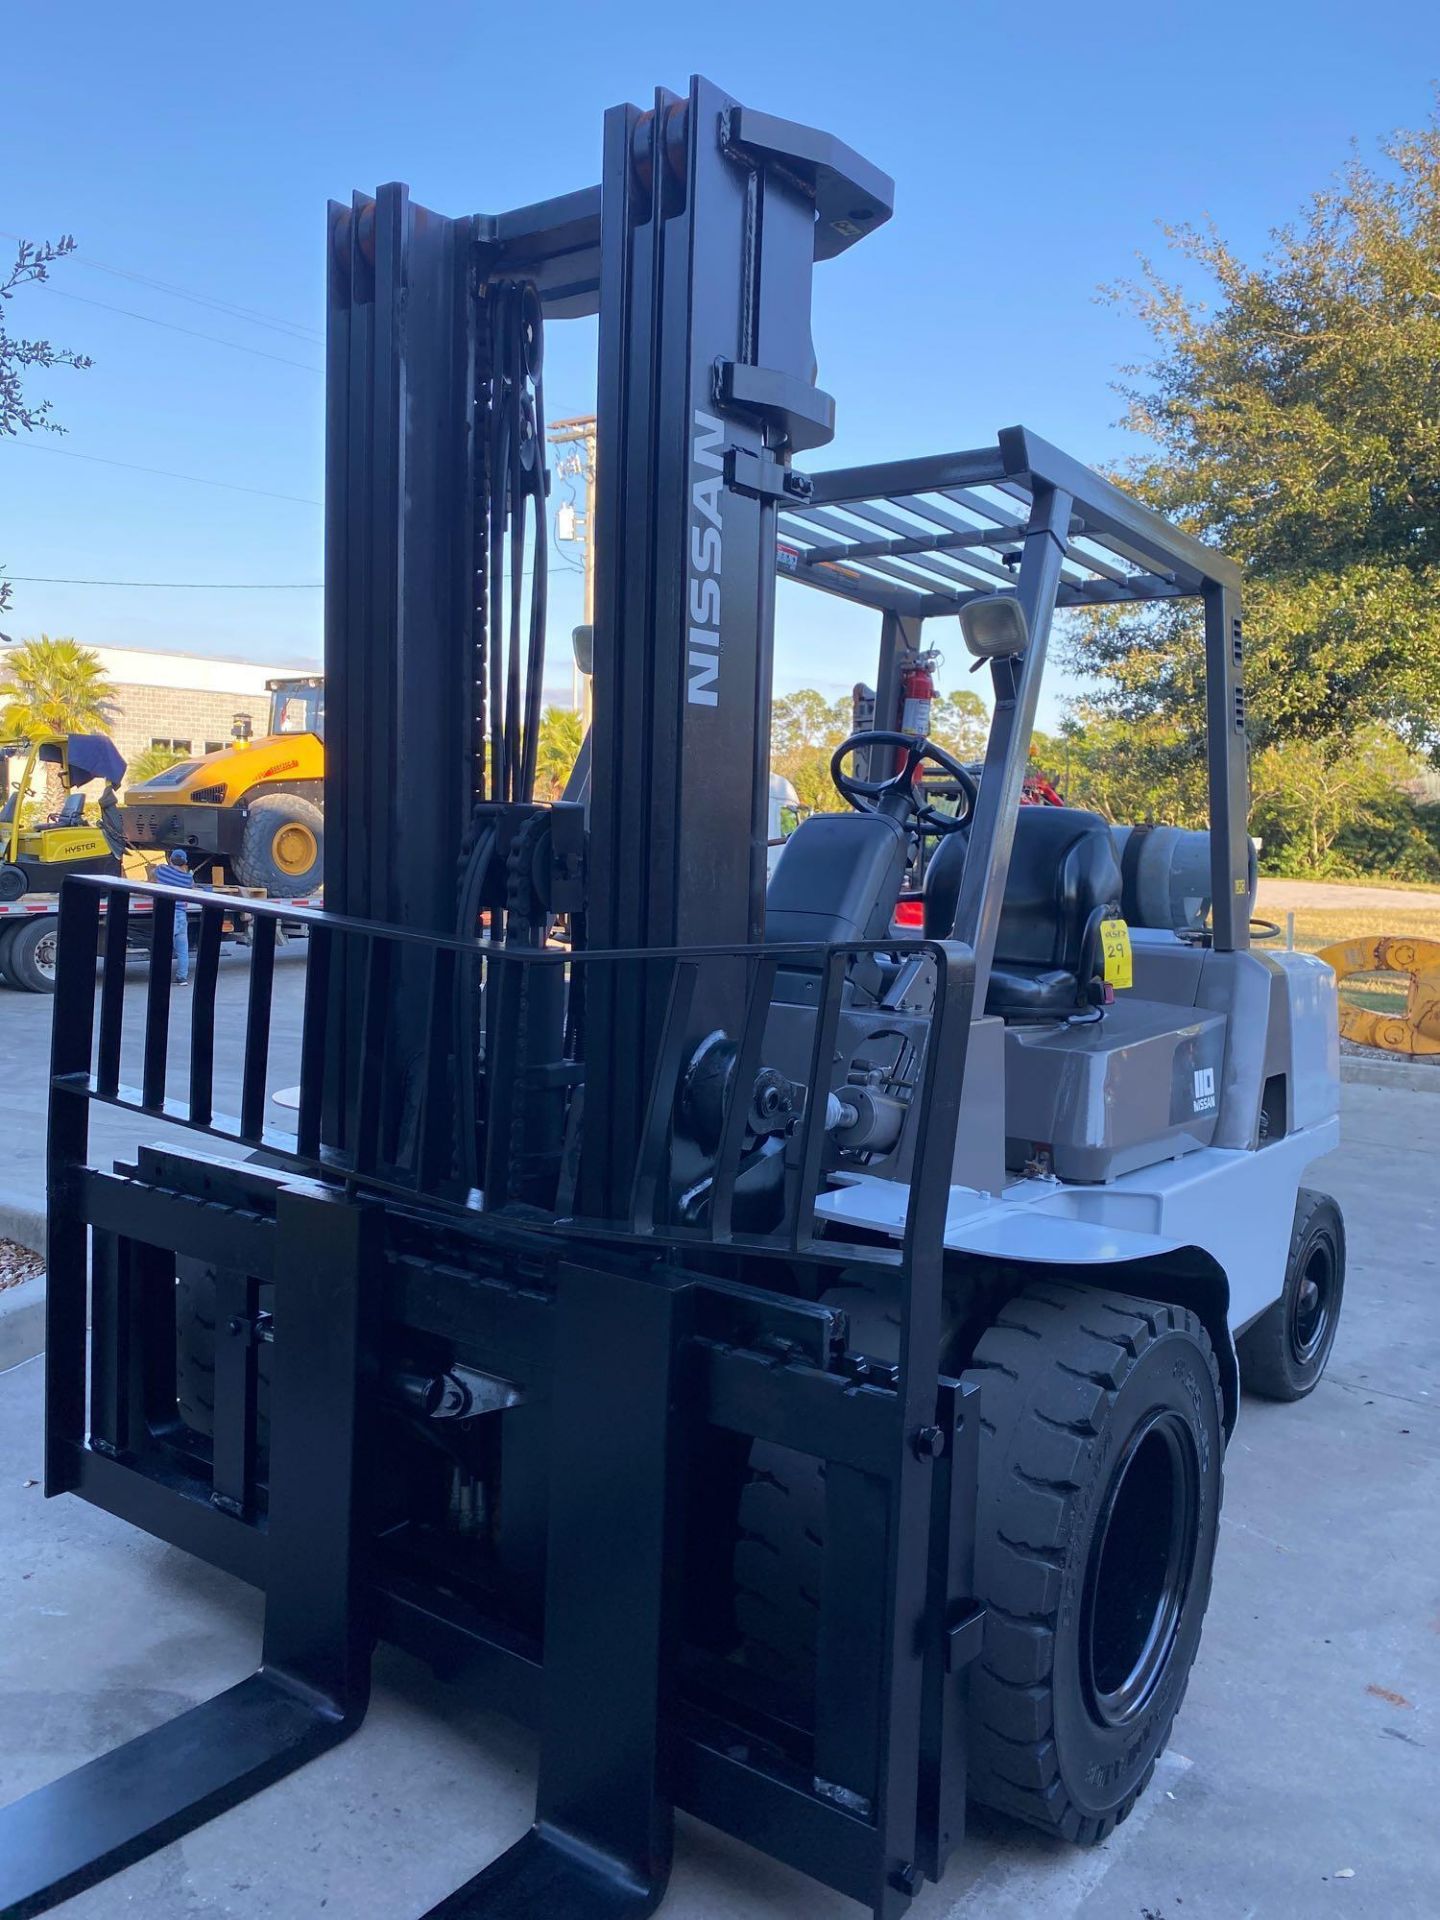 NISSAN LP FORKLIFT MODEL F04B50V-LP , APPROXIMATELY 10,800 LB CAPACITY, 201" HEIGHT CAPACITY - Image 11 of 18